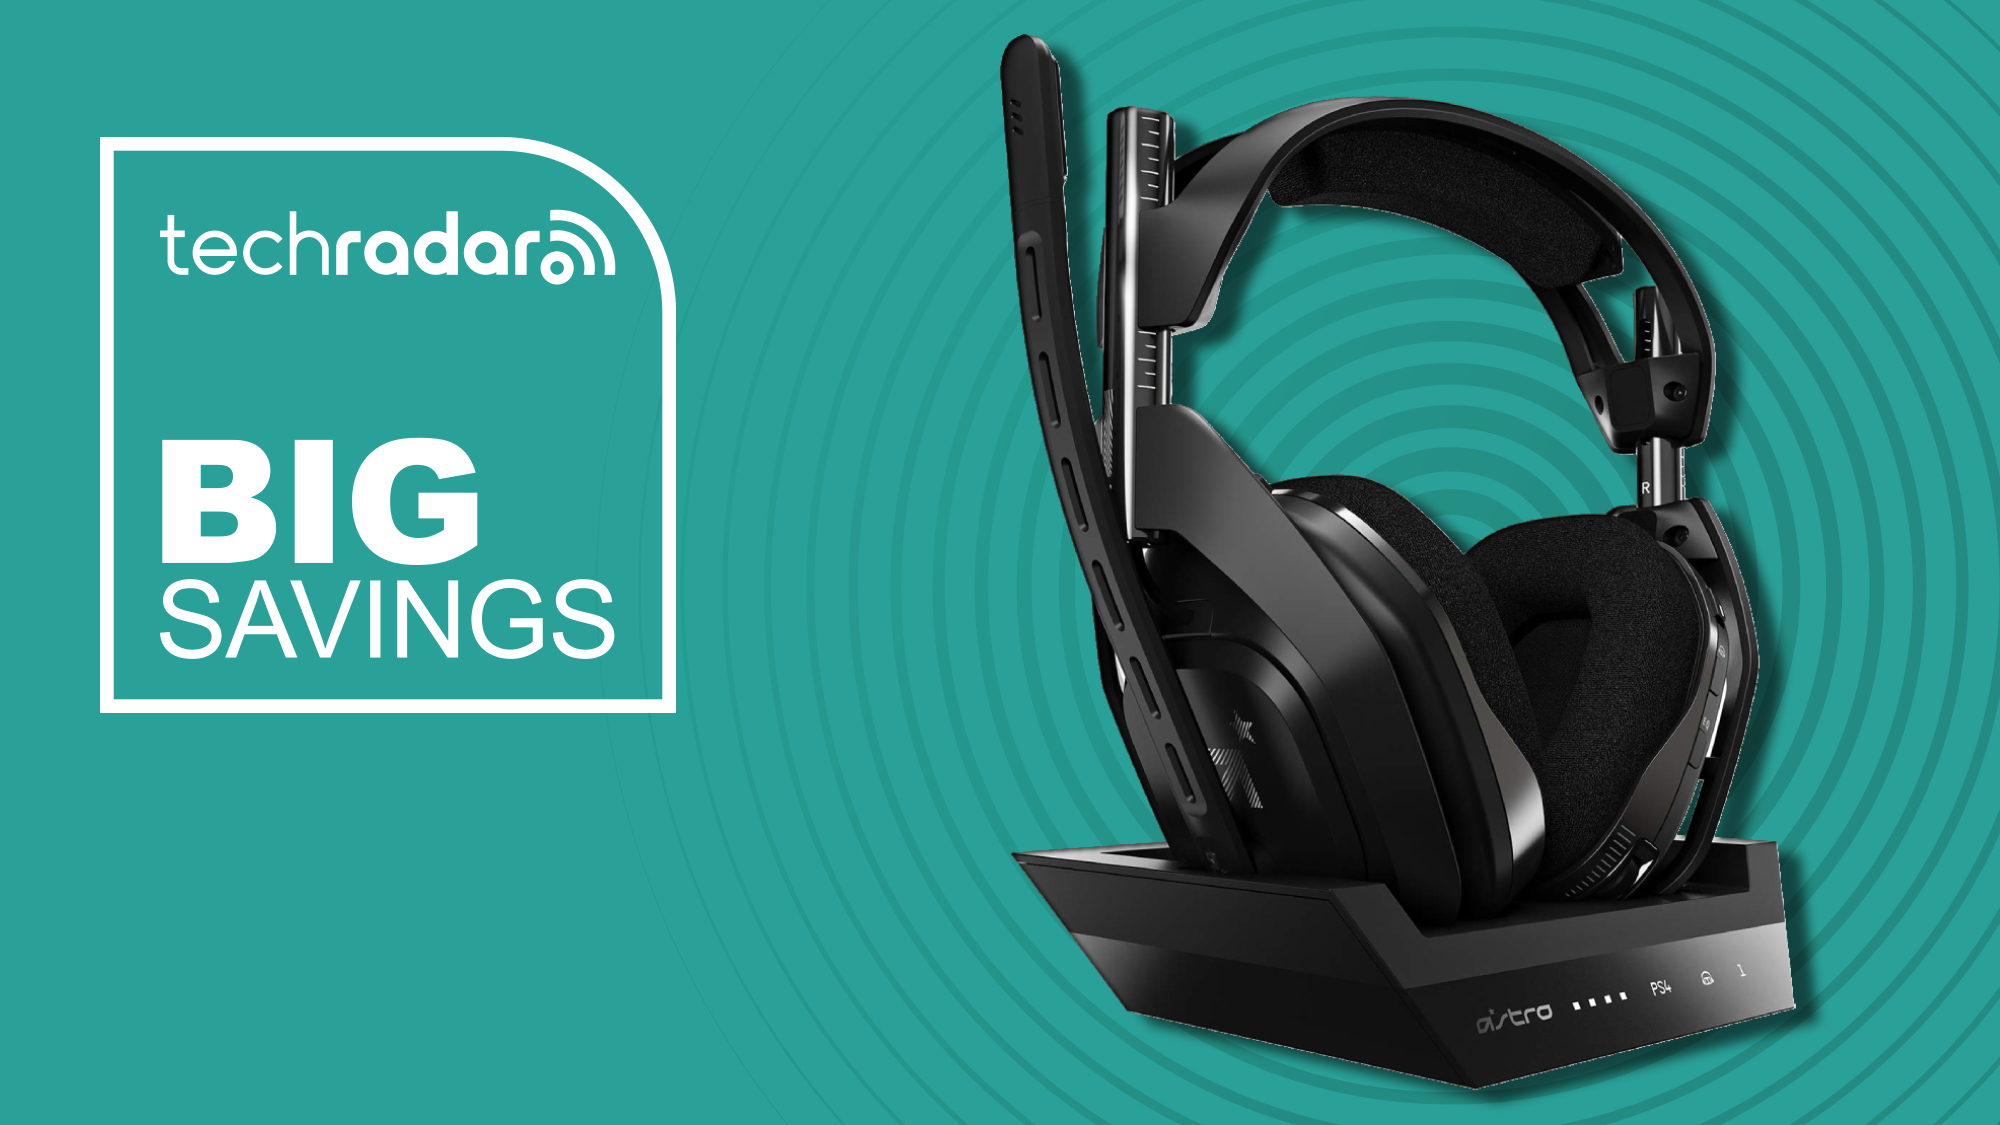 The premium Astro A50 wireless gaming headset is at its lowest price since last year's sales season